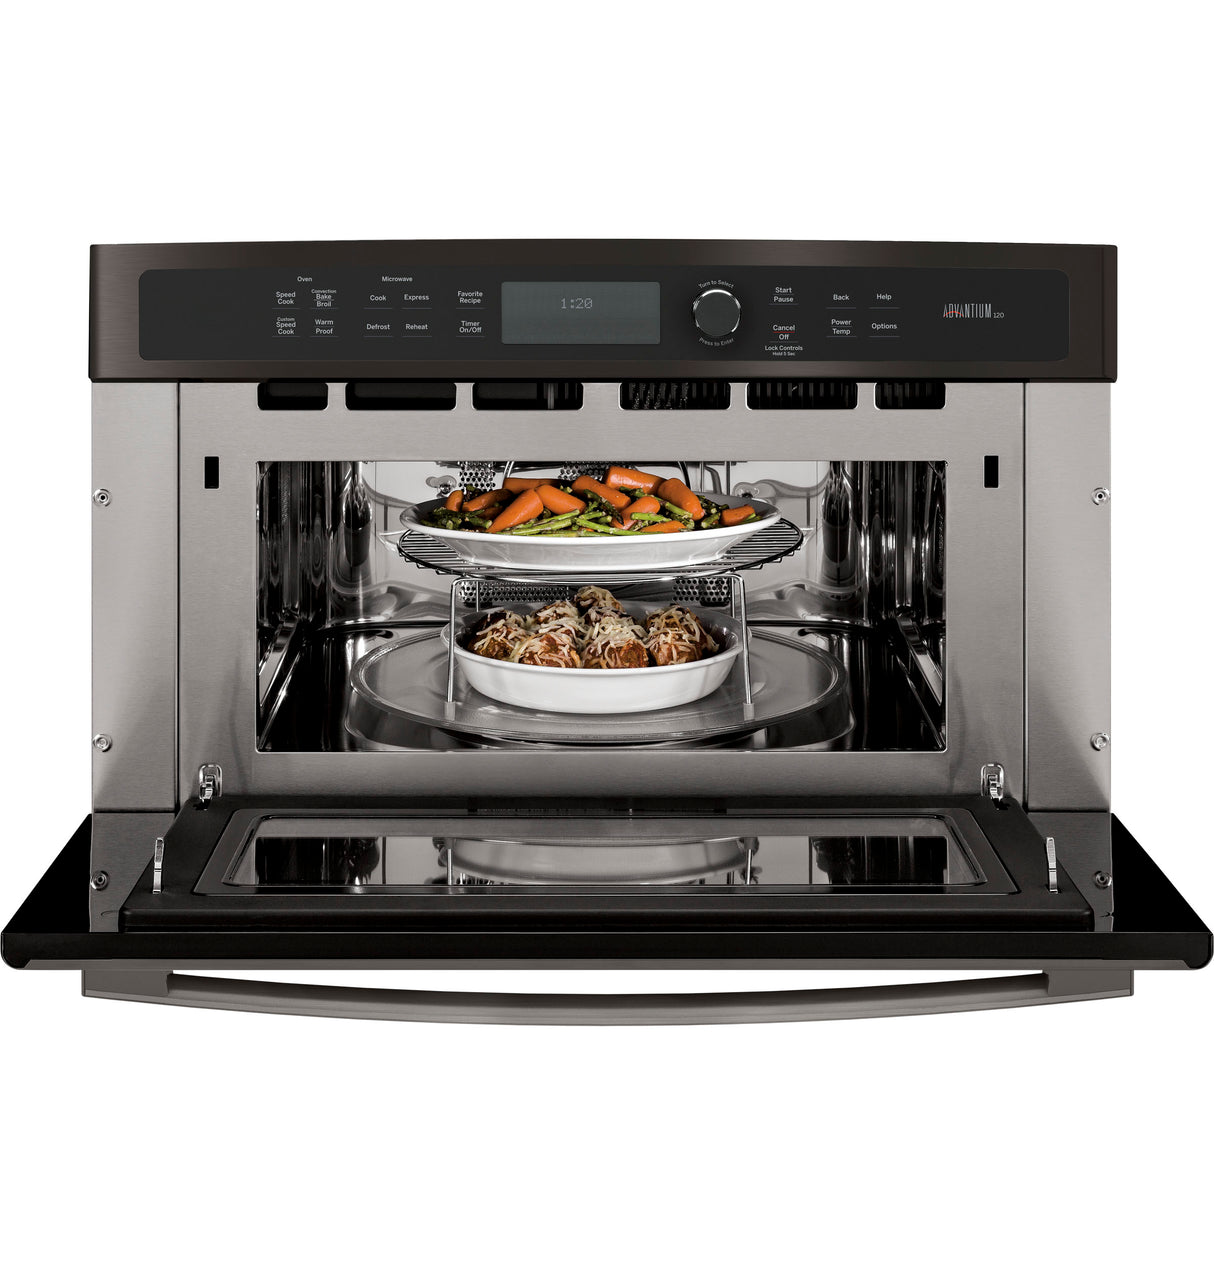 GE Profile(TM) 30 in. Single Wall Oven with Advantium(R) Technology - (PSB9120BLTS)